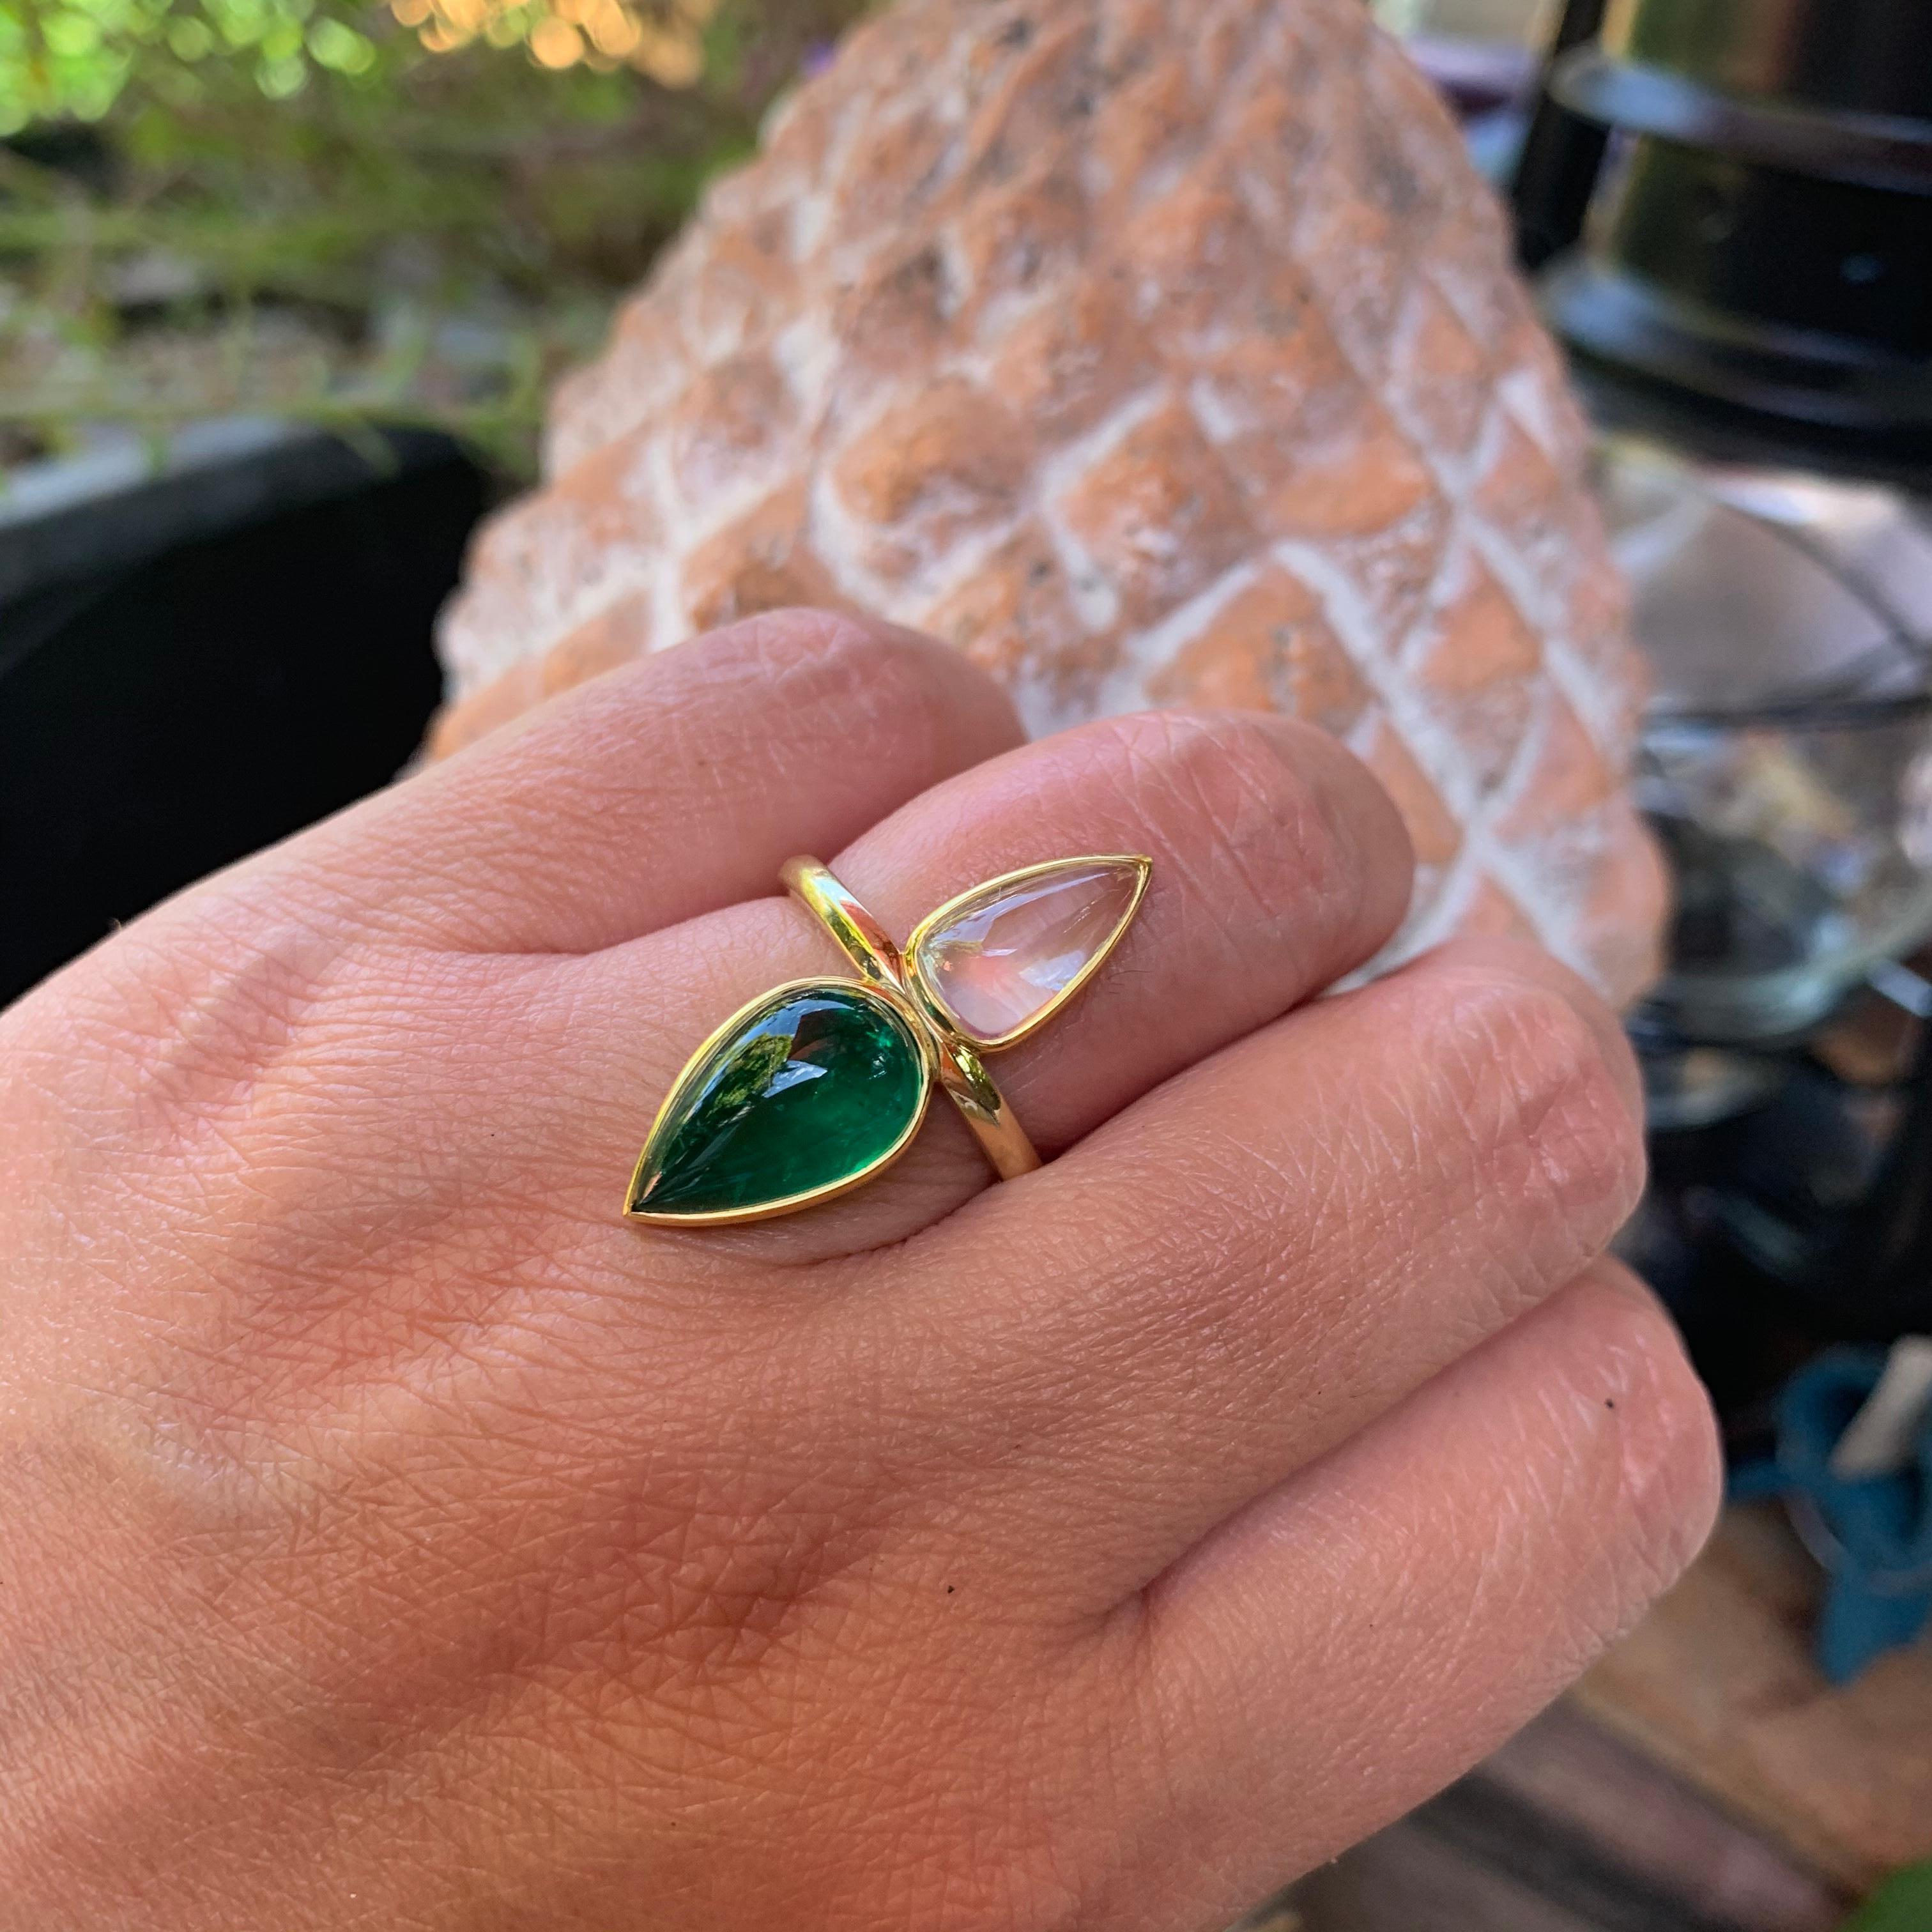 This ring features a 4.46 carat fine pear shaped Colombian emerald cabochon and exceptionally clear 2.3 carat rainbow moonstone from Madagascar. These two elements are brought together in this hand forged 22/18 karat Fairmined gold ring  by our